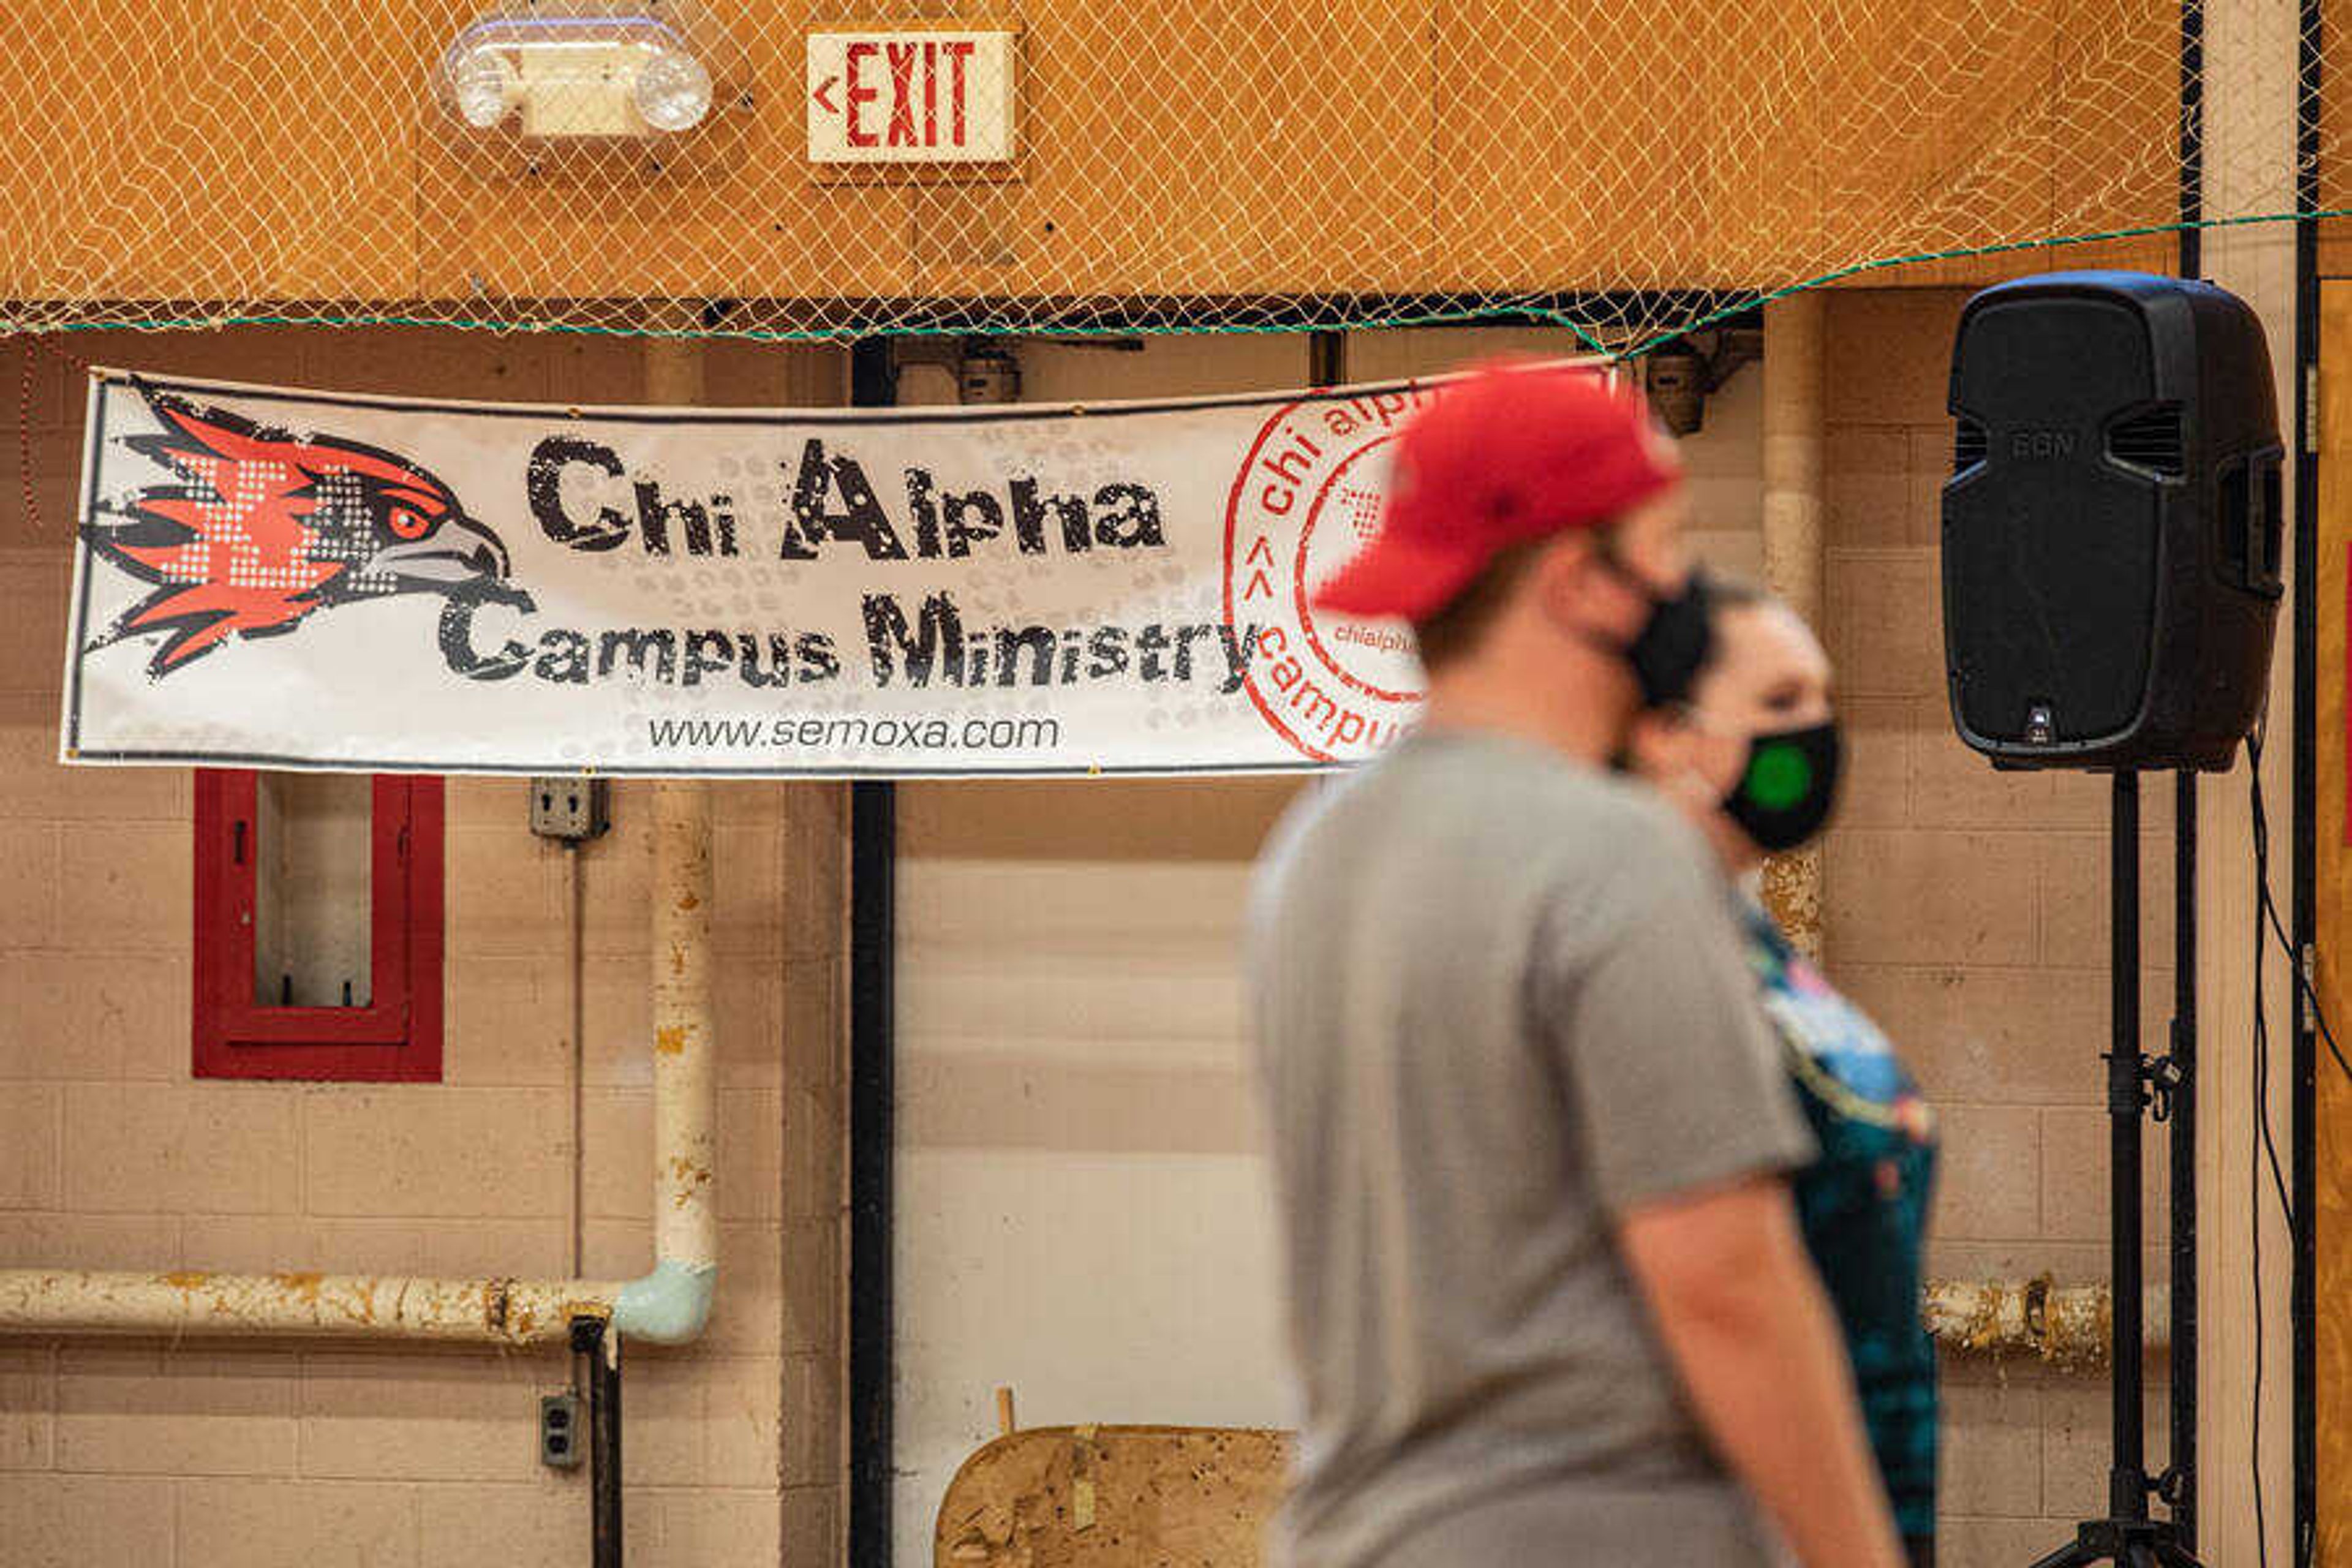 A Chi Alpha Campus Ministry banner hangs in the background of the bazooka ball event held on Aug. 31 in Parker Hall.